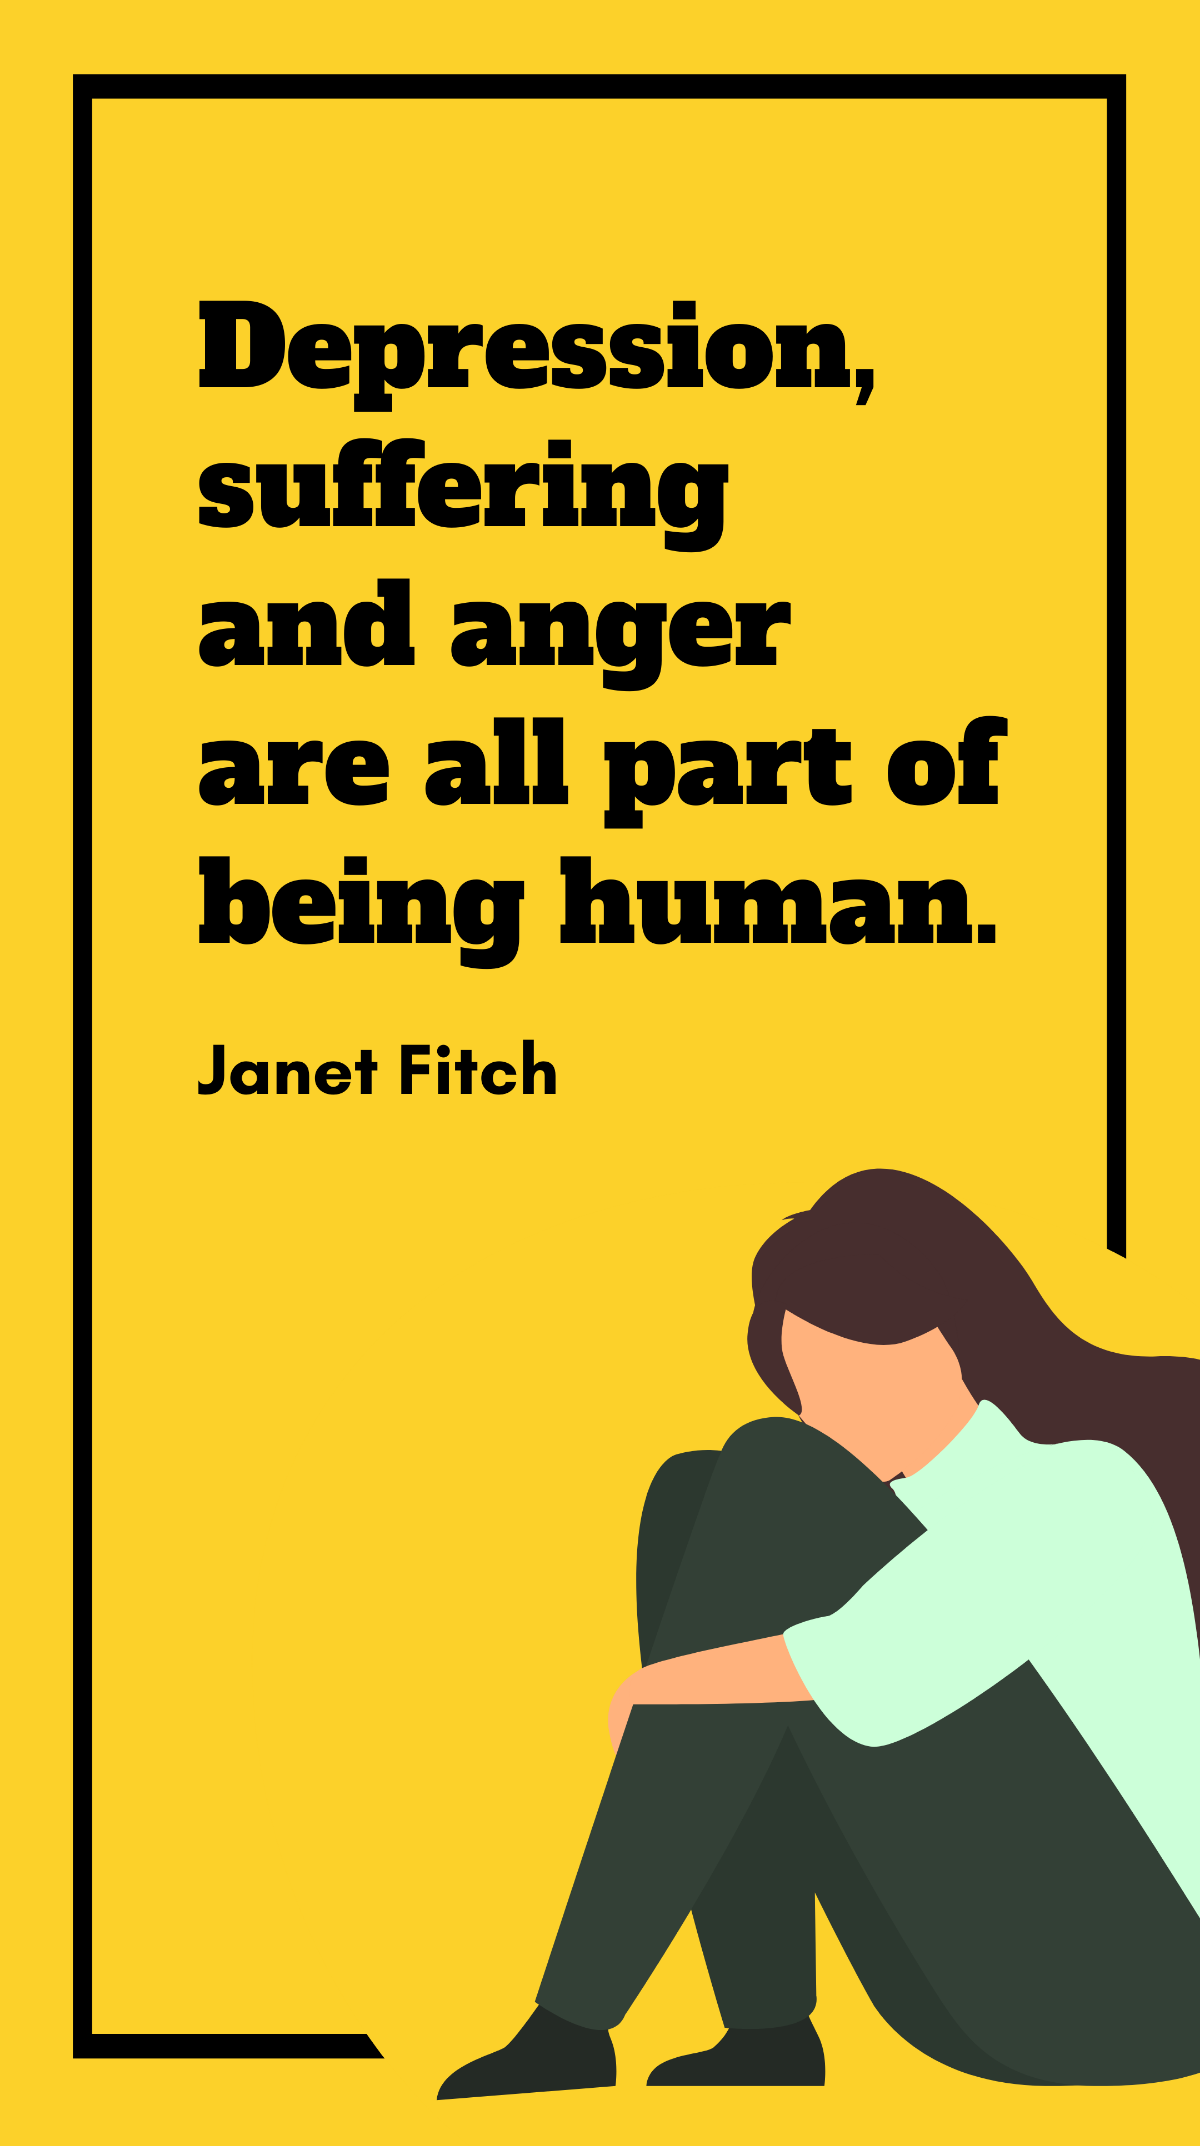 Janet Fitch - Depression, suffering and anger are all part of being human. Template